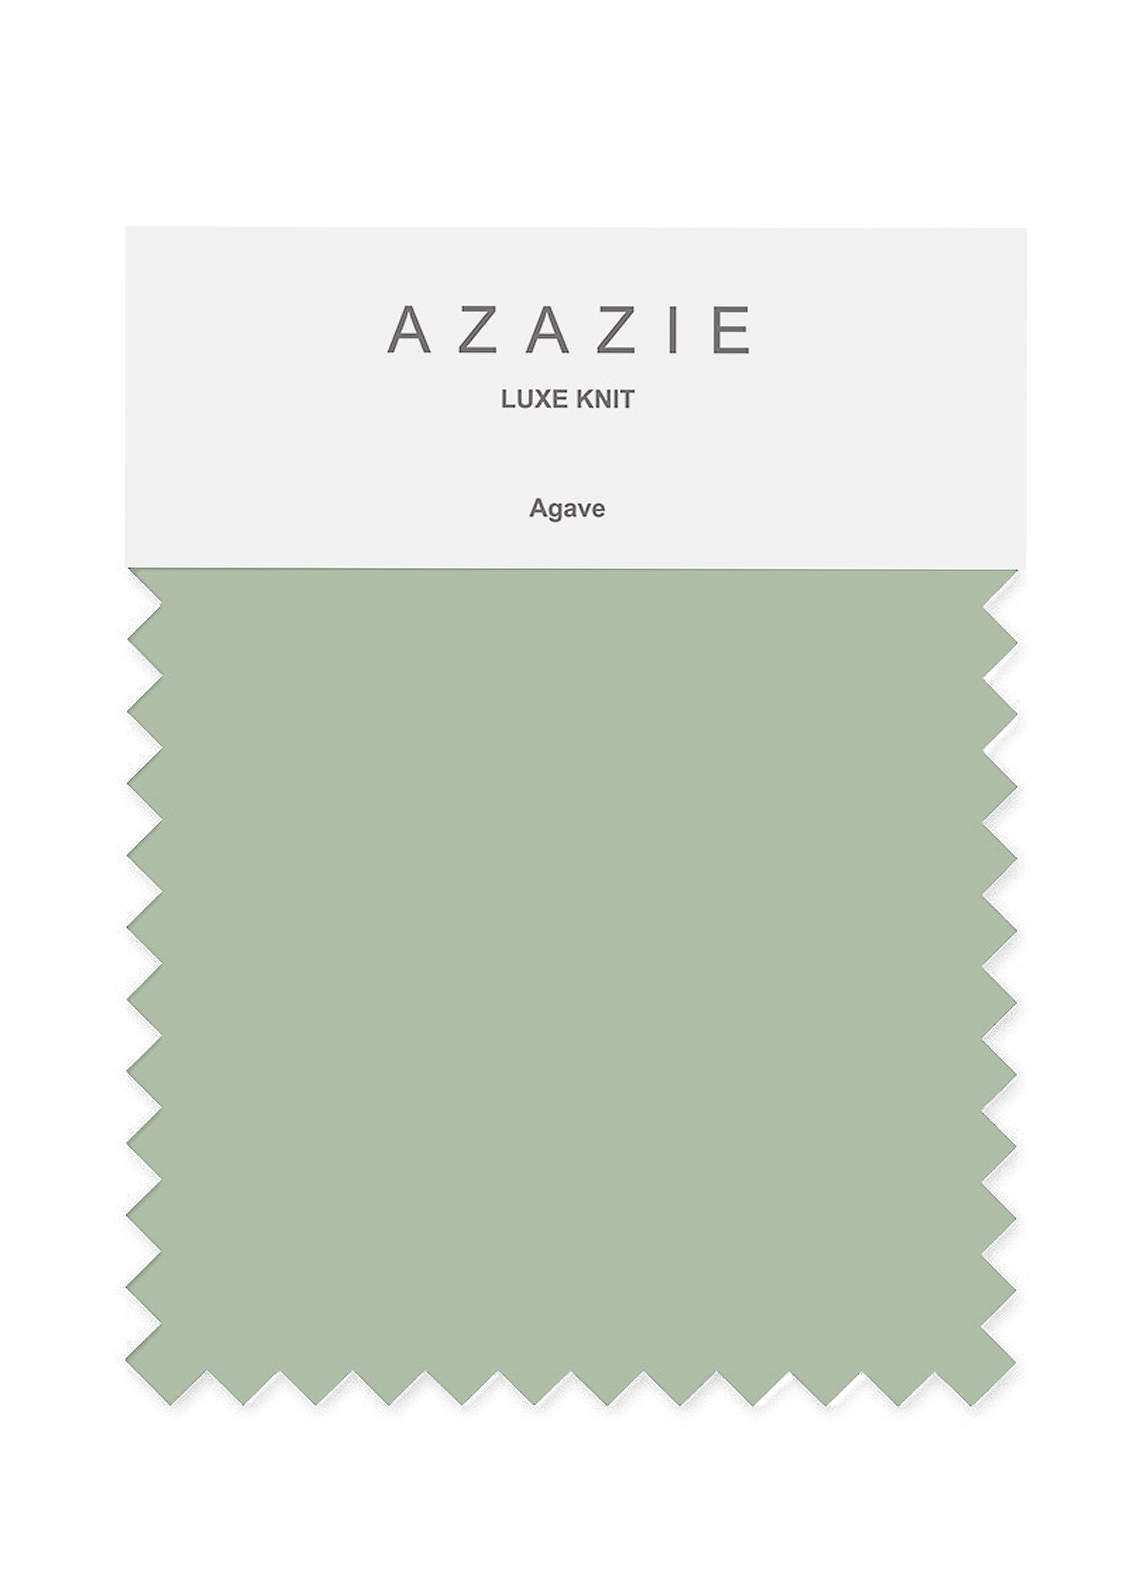 front Azazie Luxe Knit Swatches